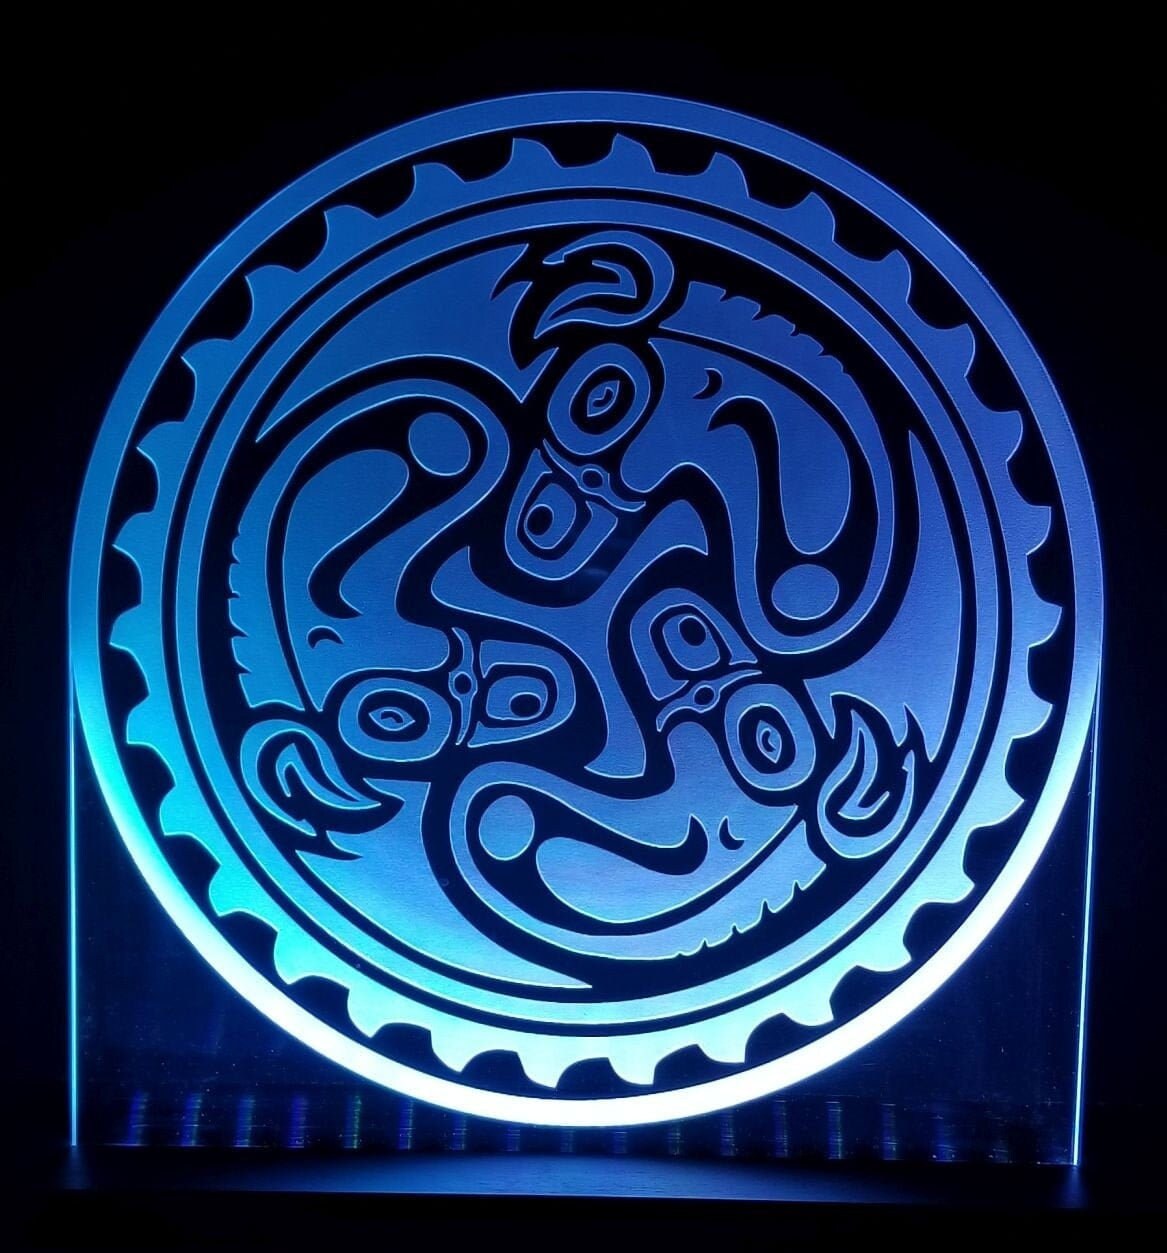 Gov't Mule With 3 Mules LED tabletop light lamp/sign - Neon-like - Free shipping - Made in USA.